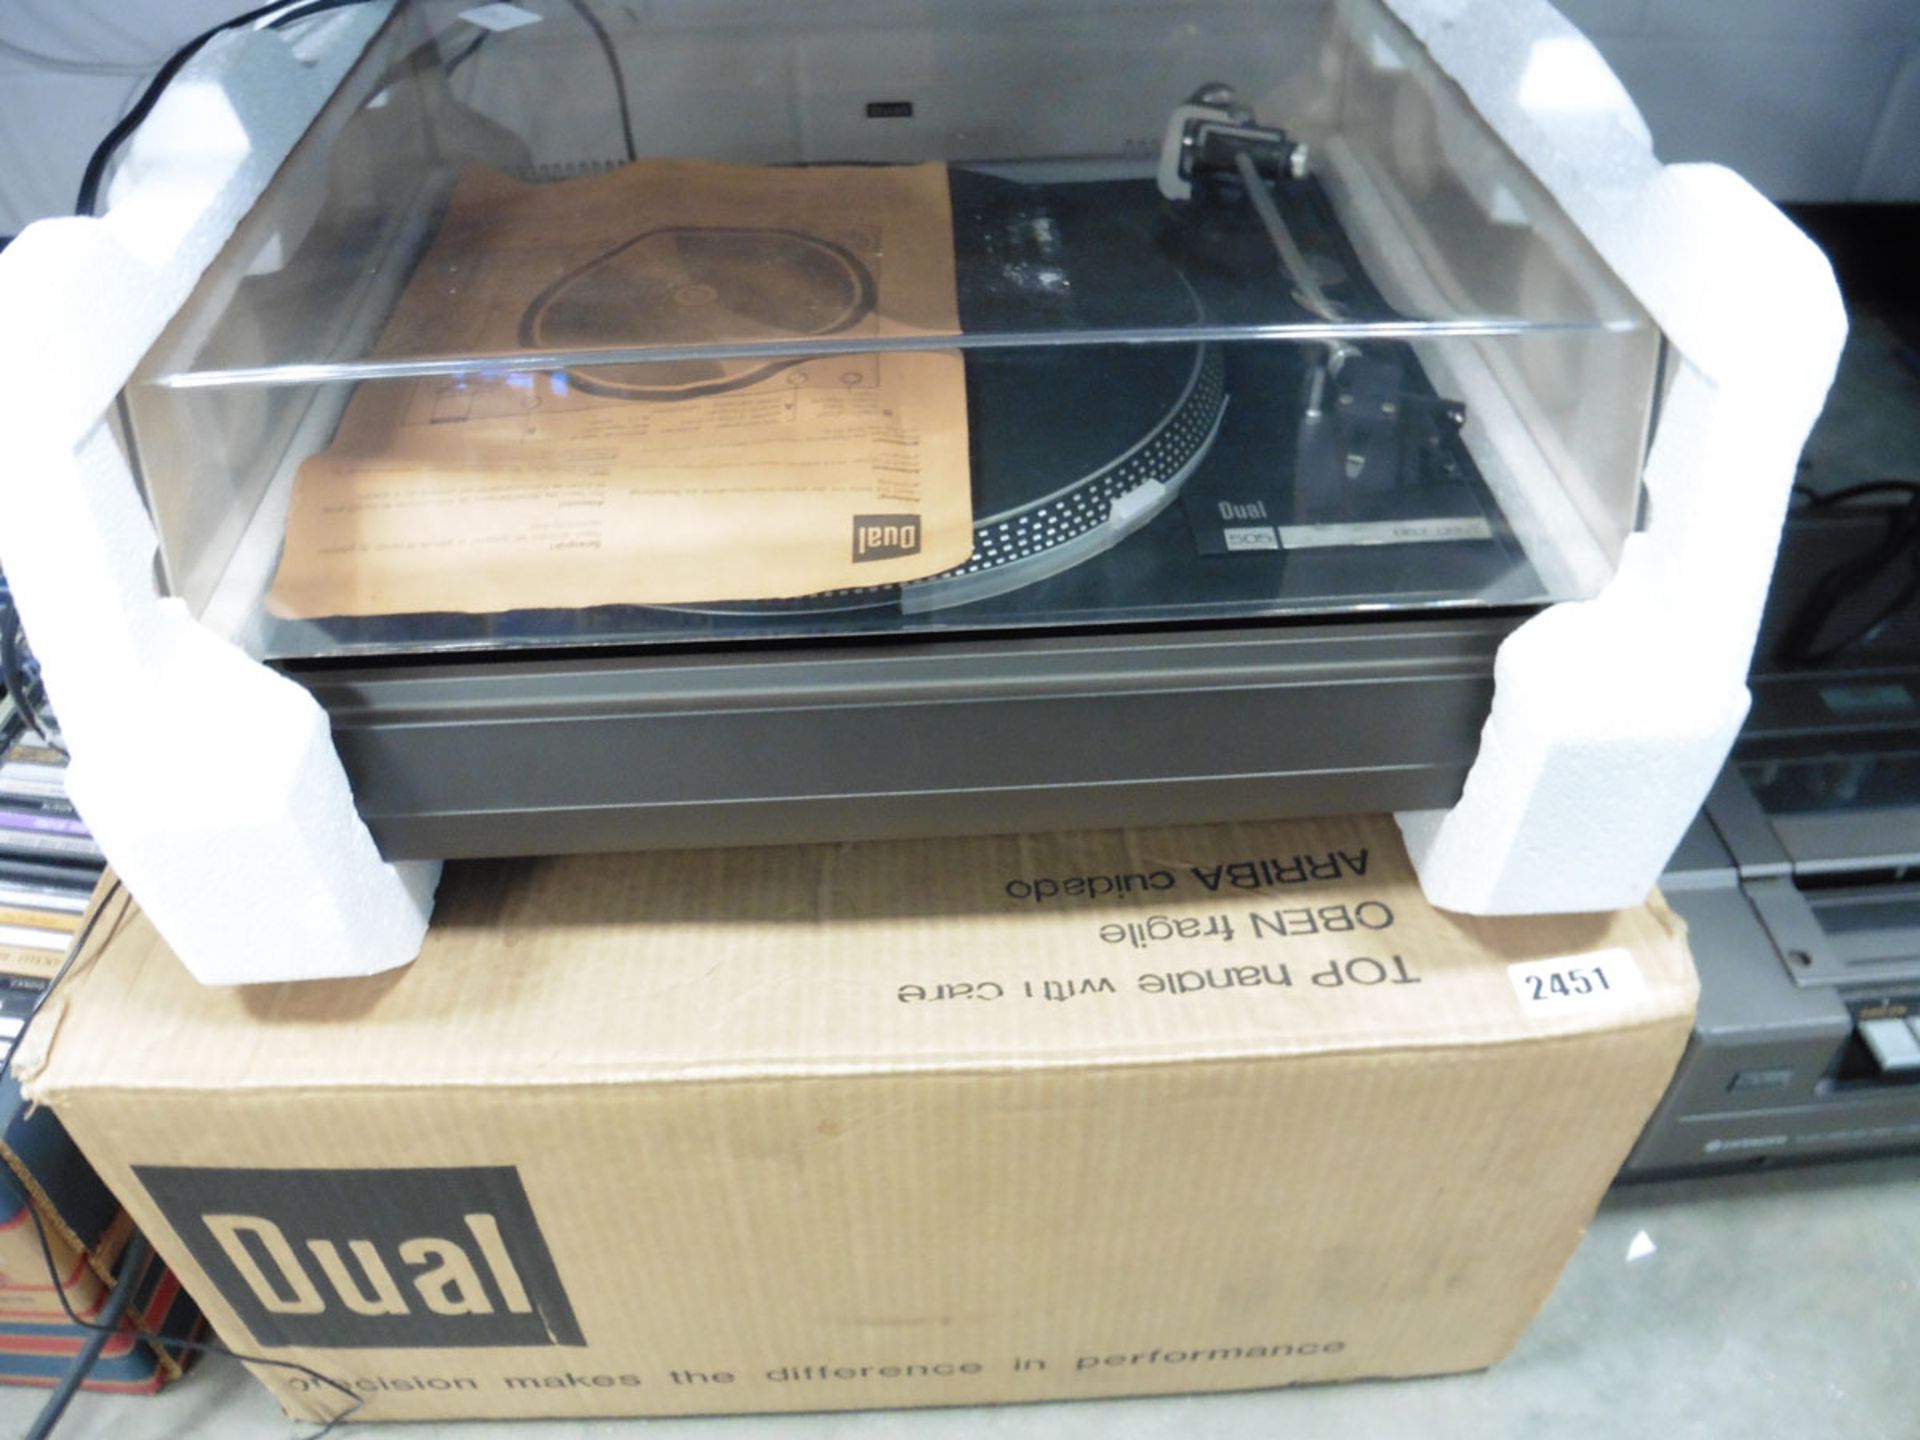 Dual precision turntable model 505 with cartridge and toner